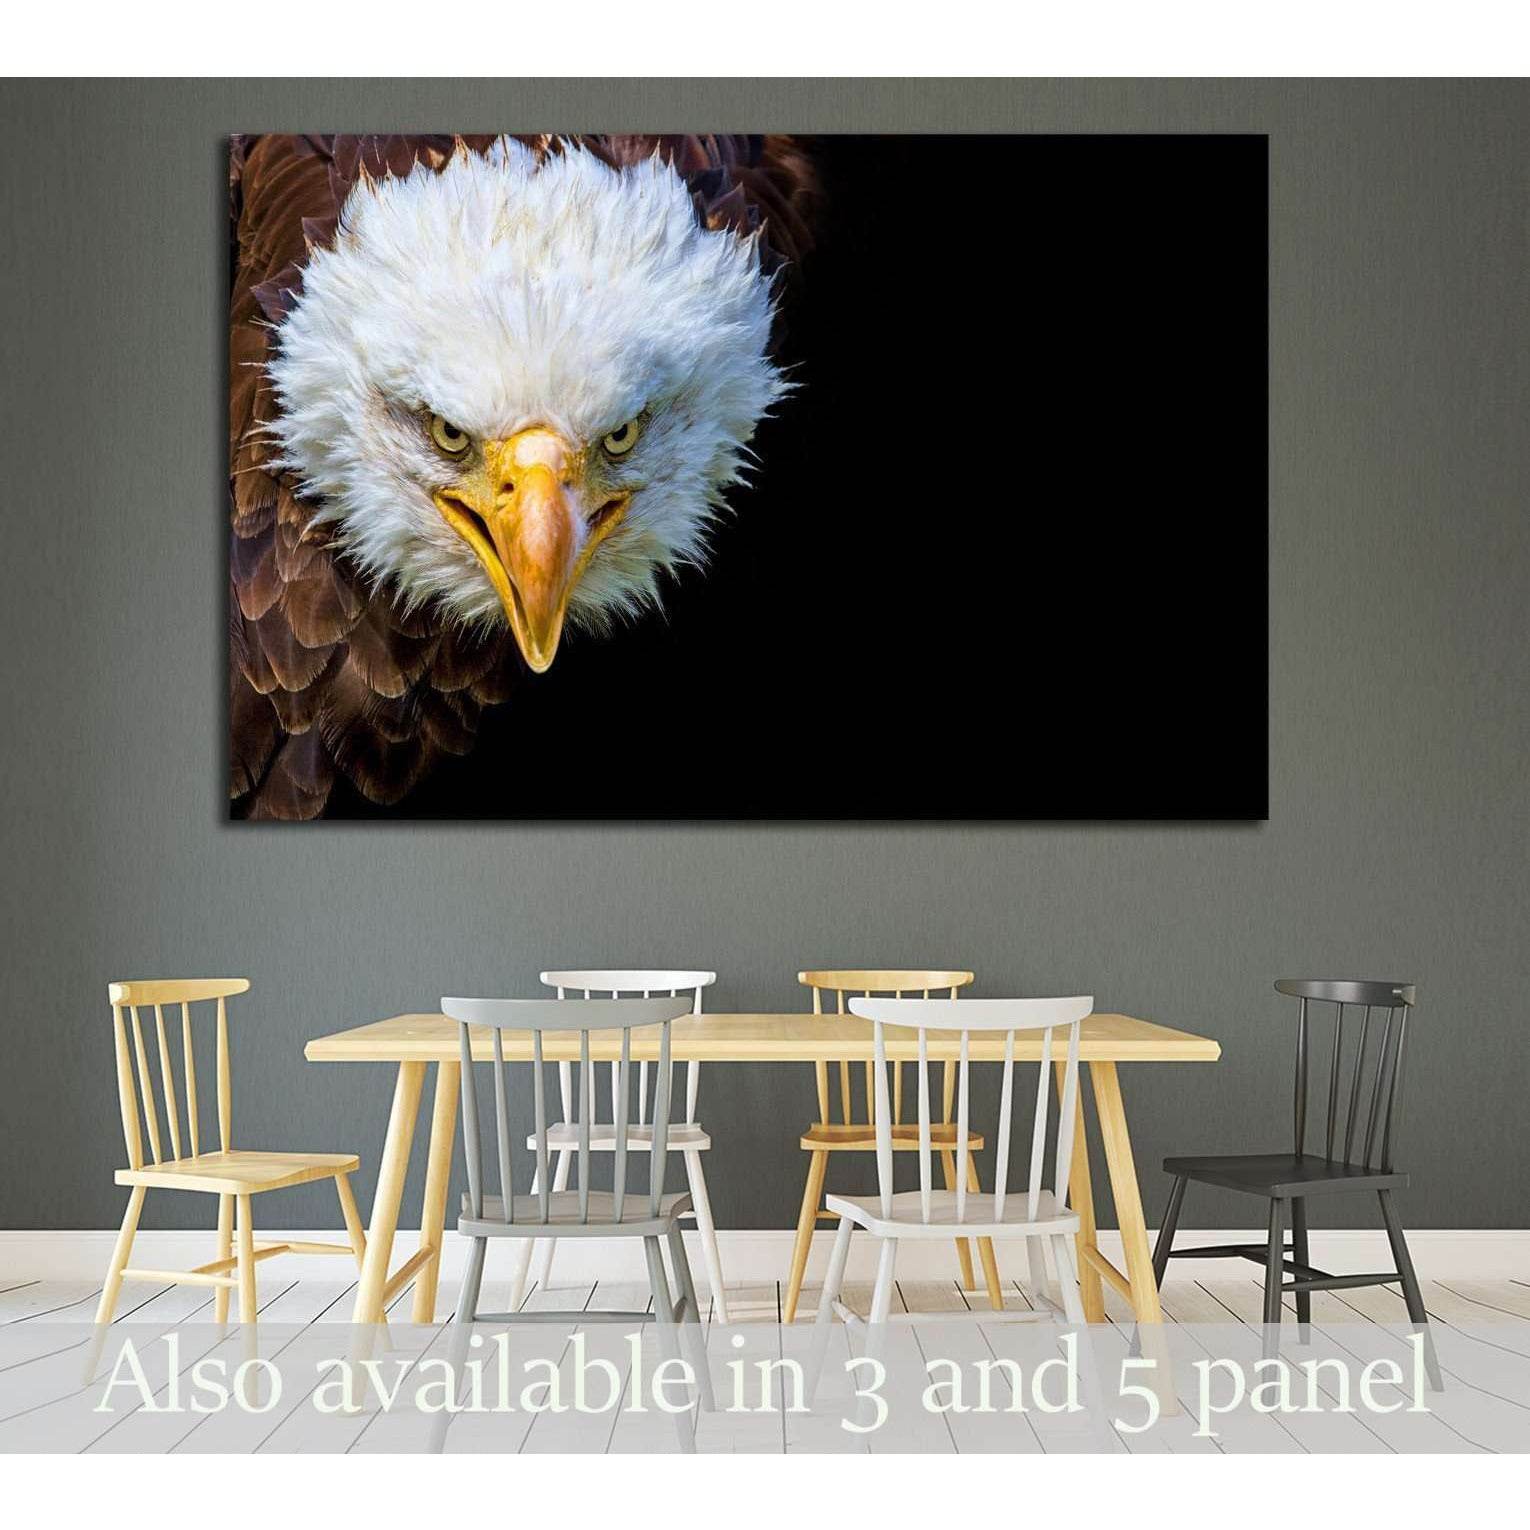 Angry north american bald eagle on black background №1863 - canvas print wall art by Zellart